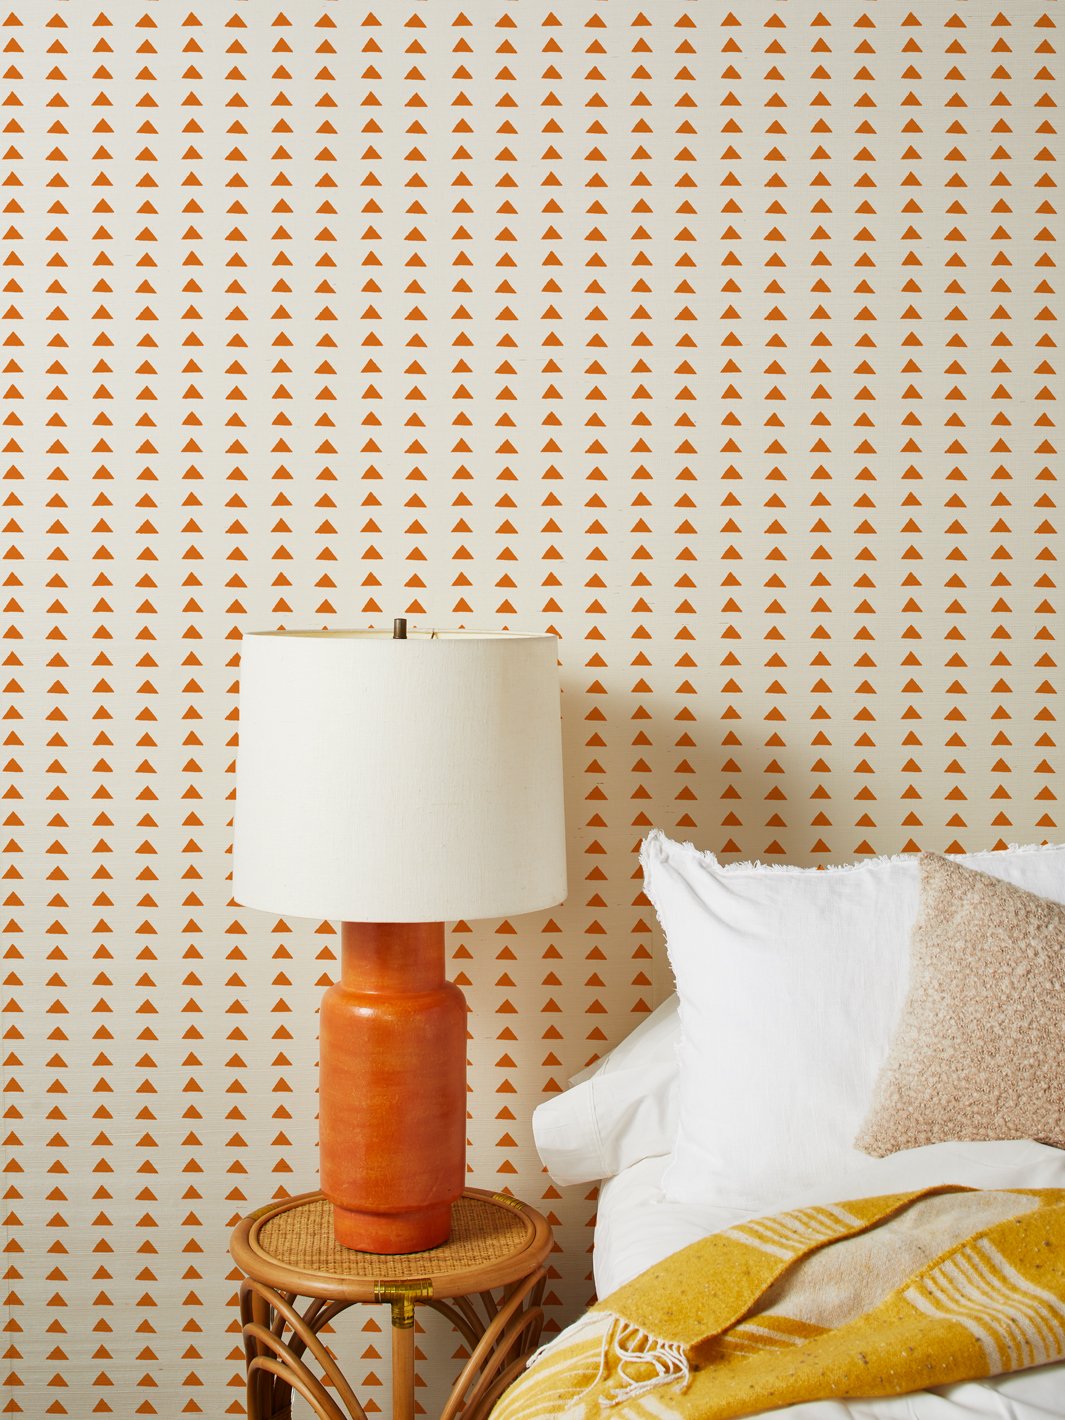 'Triangles' Grasscloth' Wallpaper by Nathan Turner - Terracotta